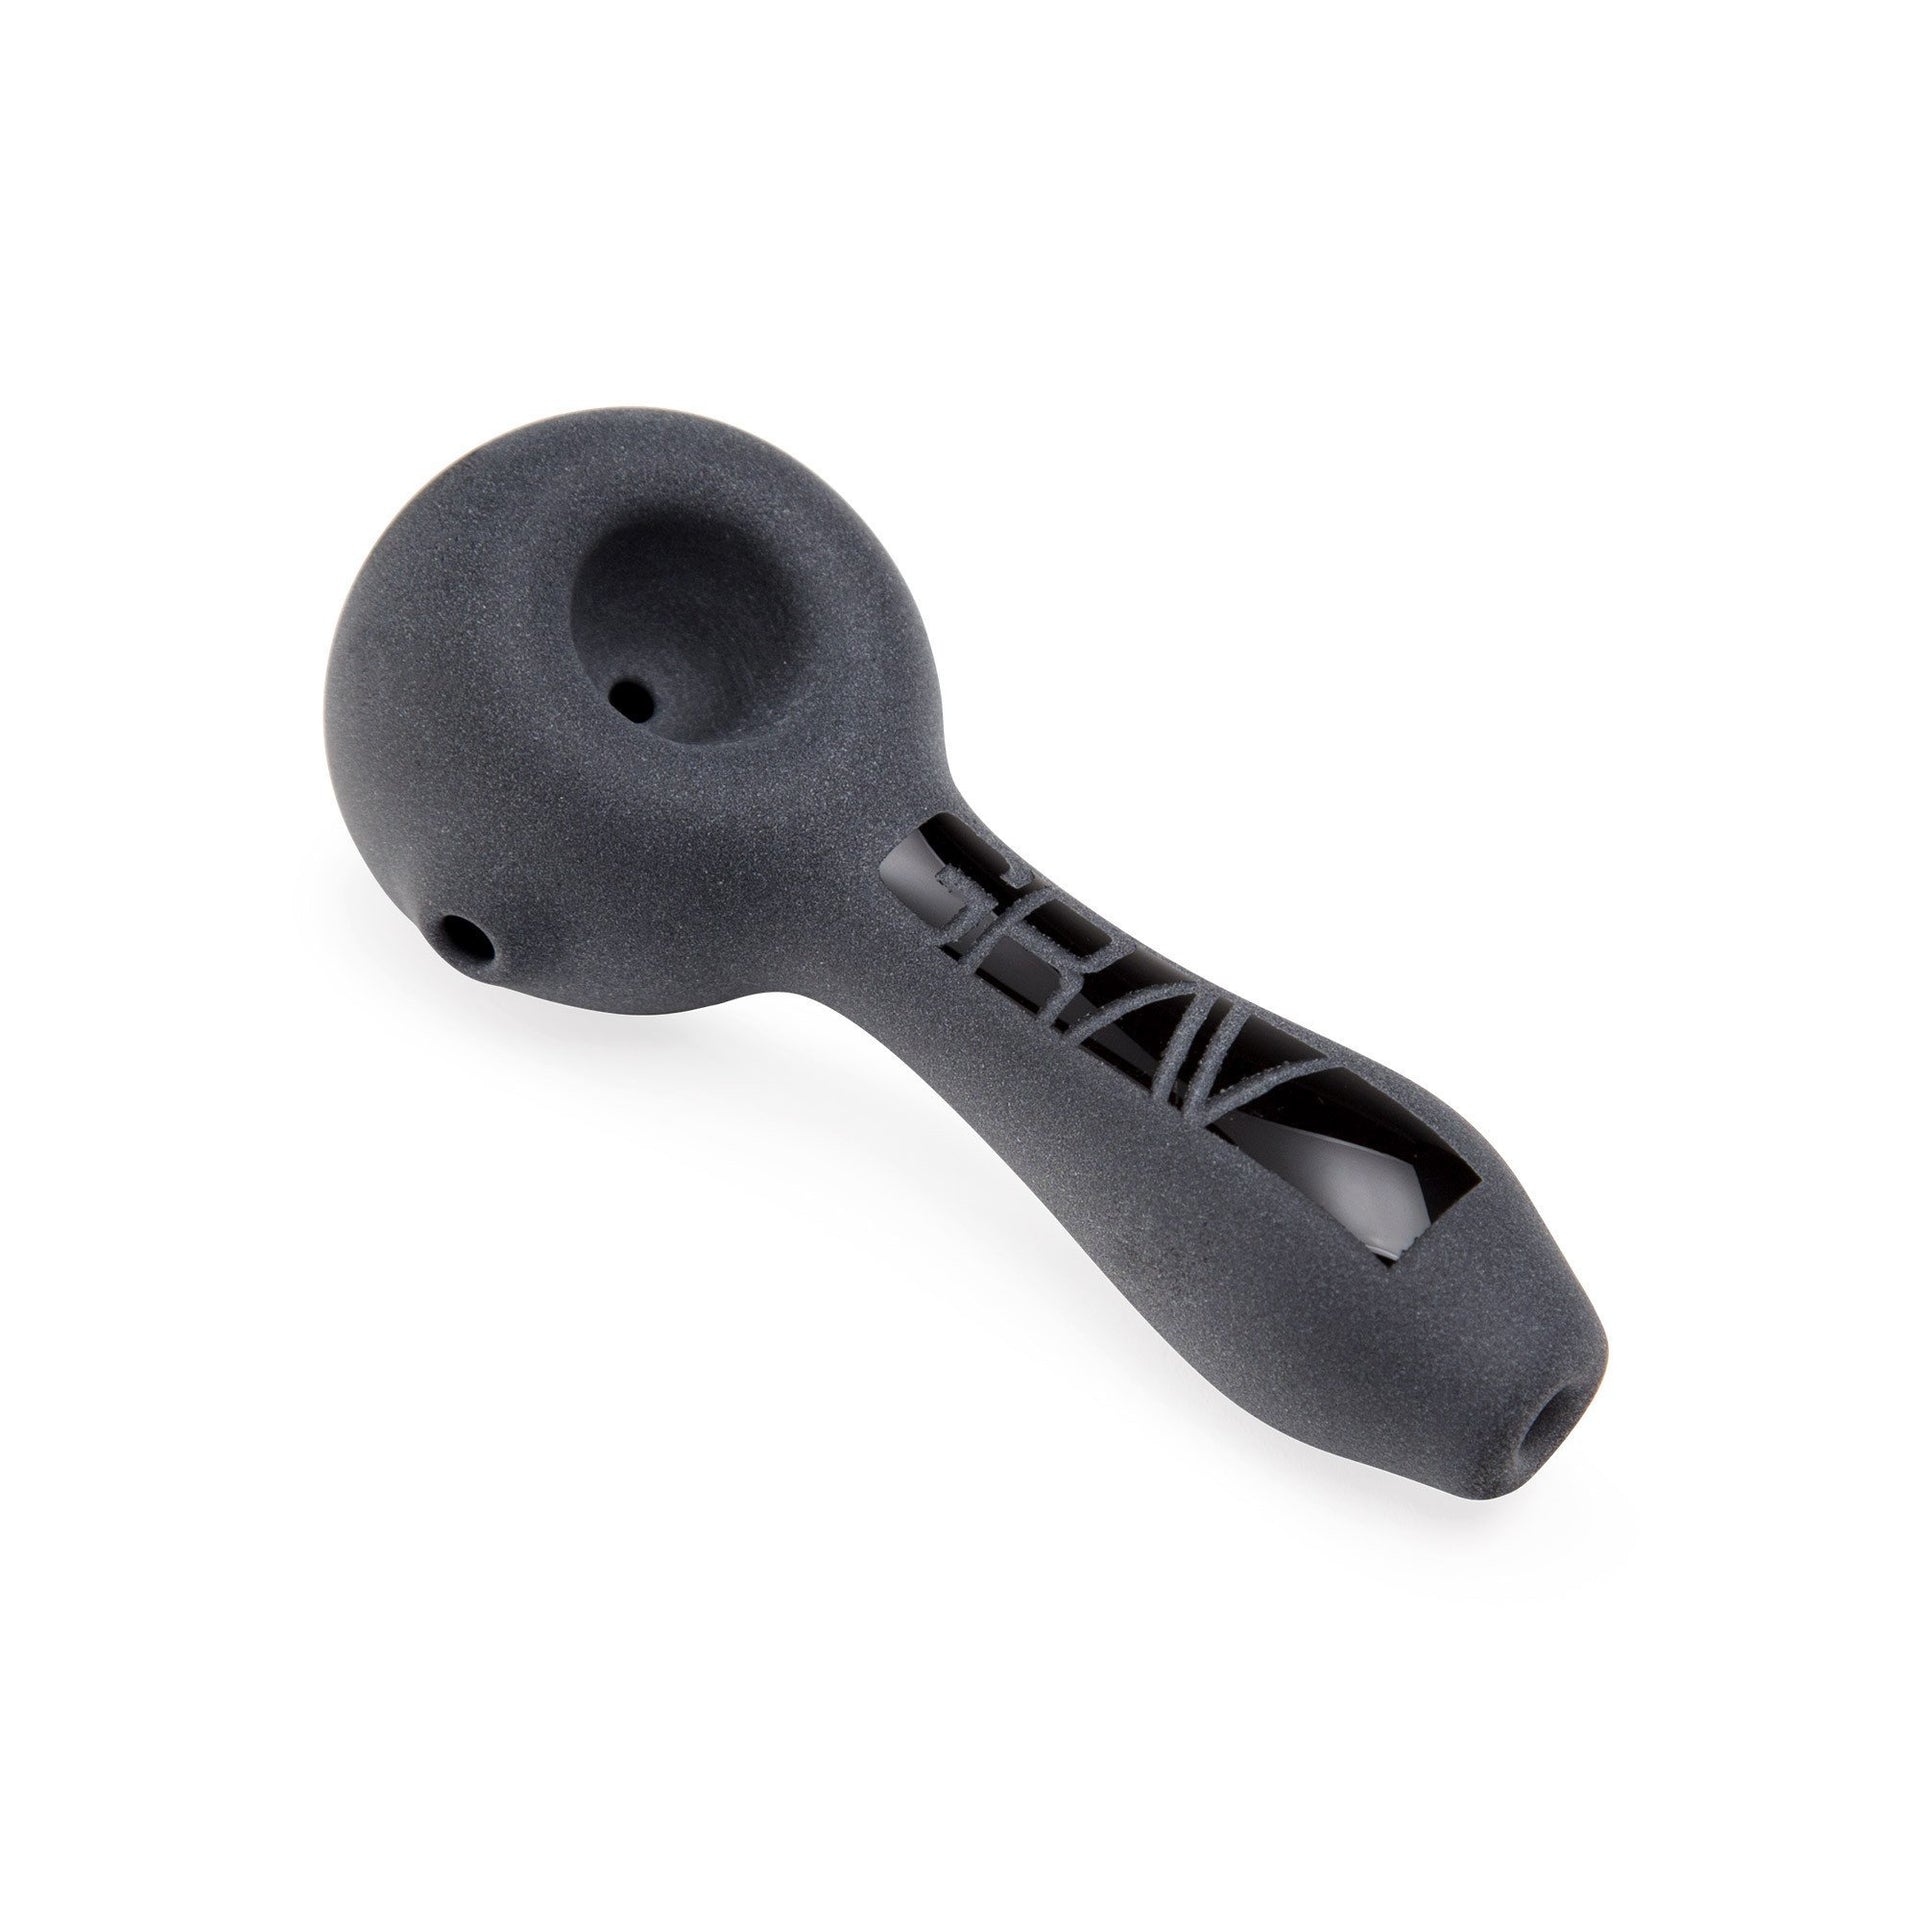 GRAV Sand Blasted Spoon - 420 Science - The most trusted online smoke shop.